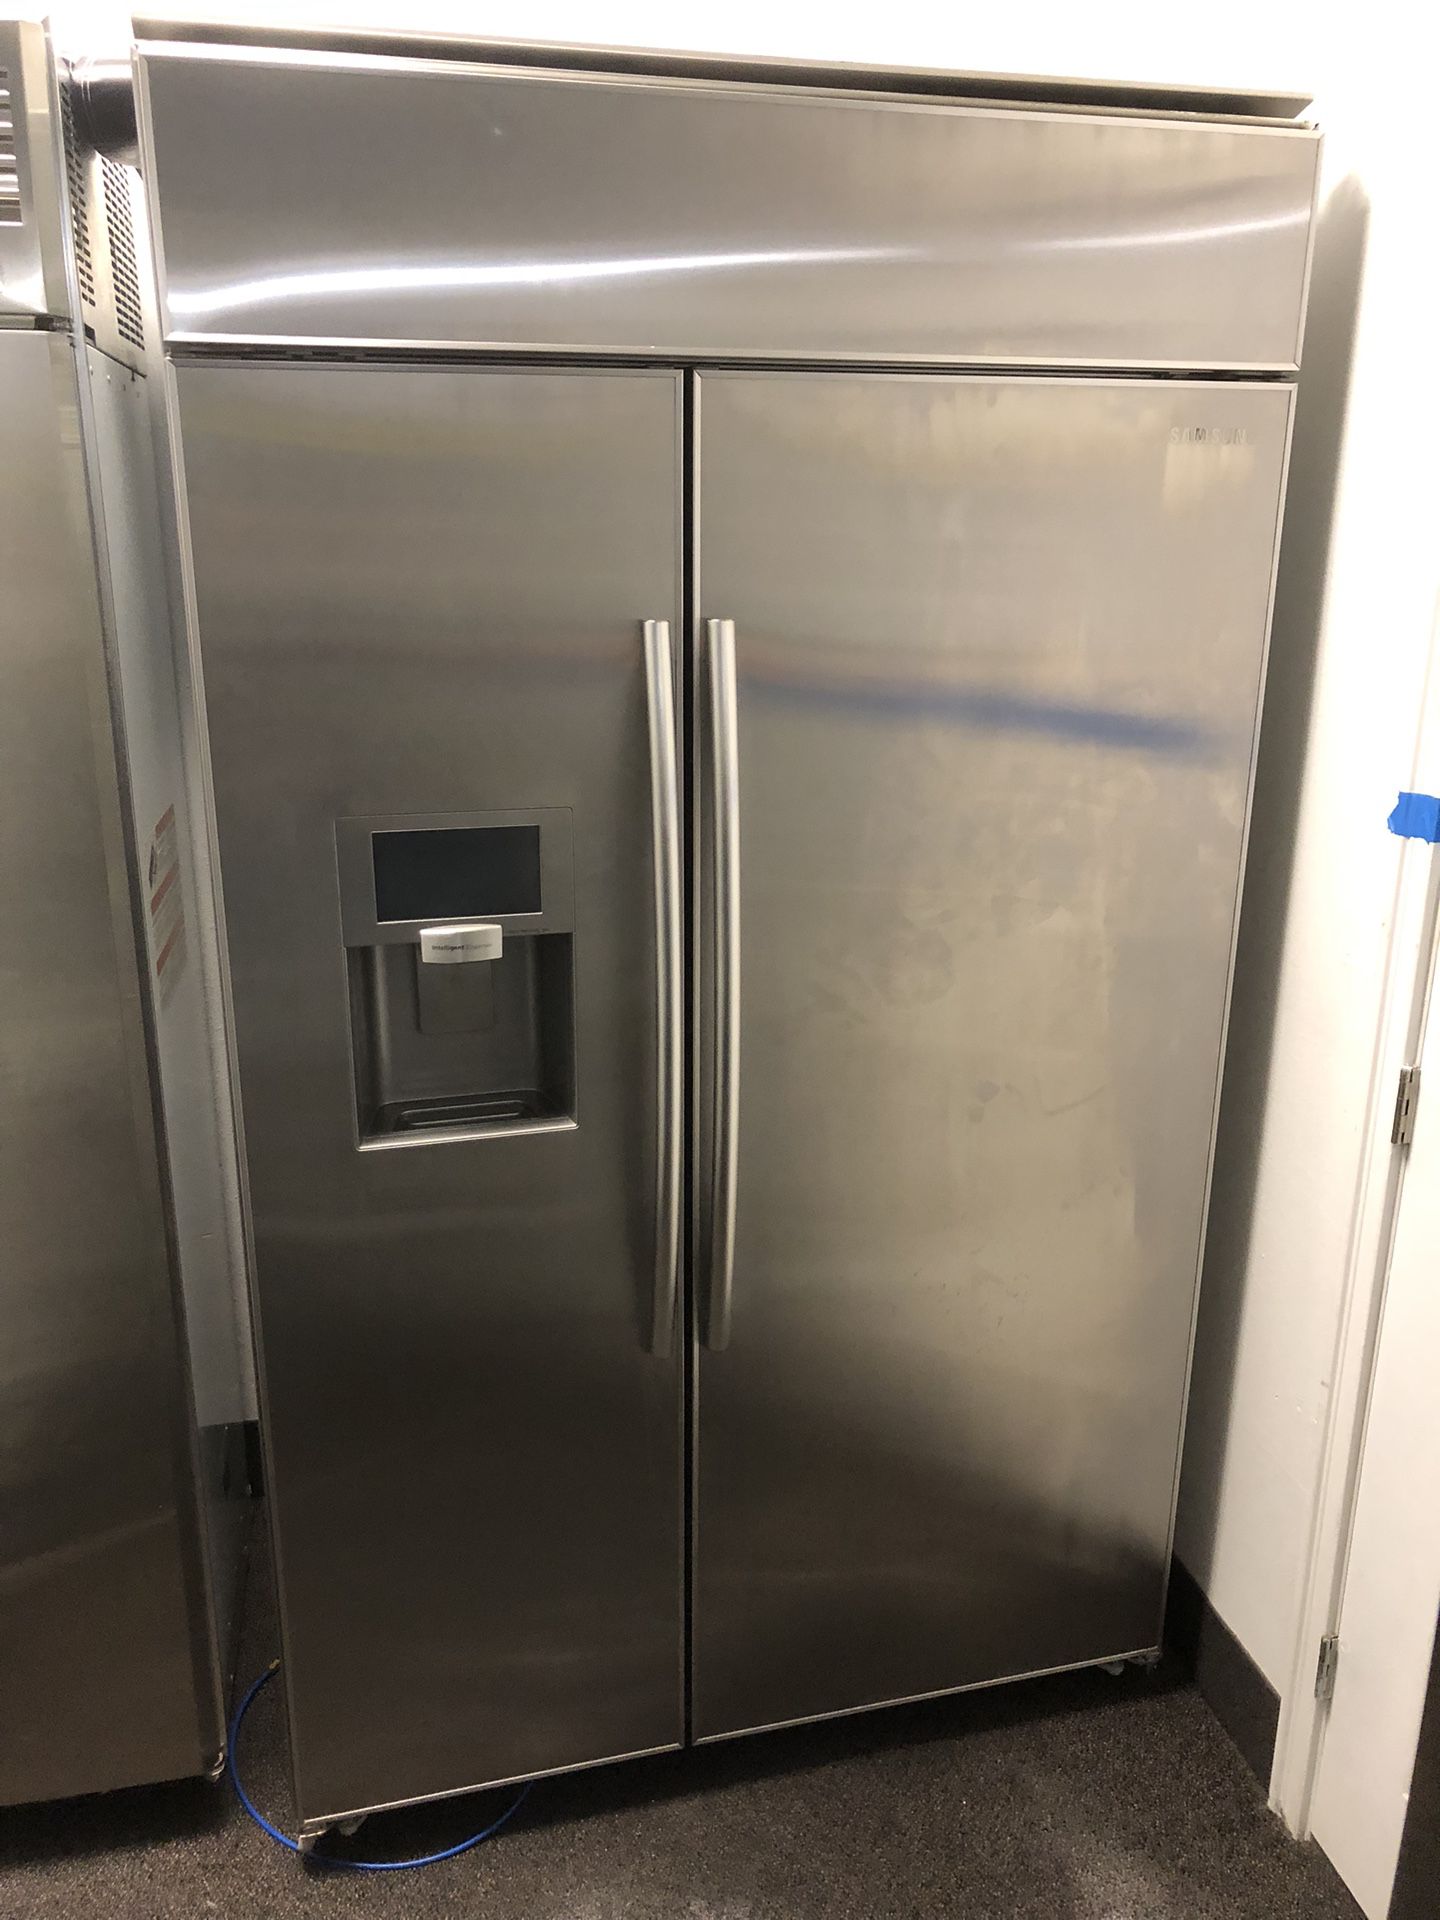 Samsung Stainless Steel Side By Side Refrigerator 